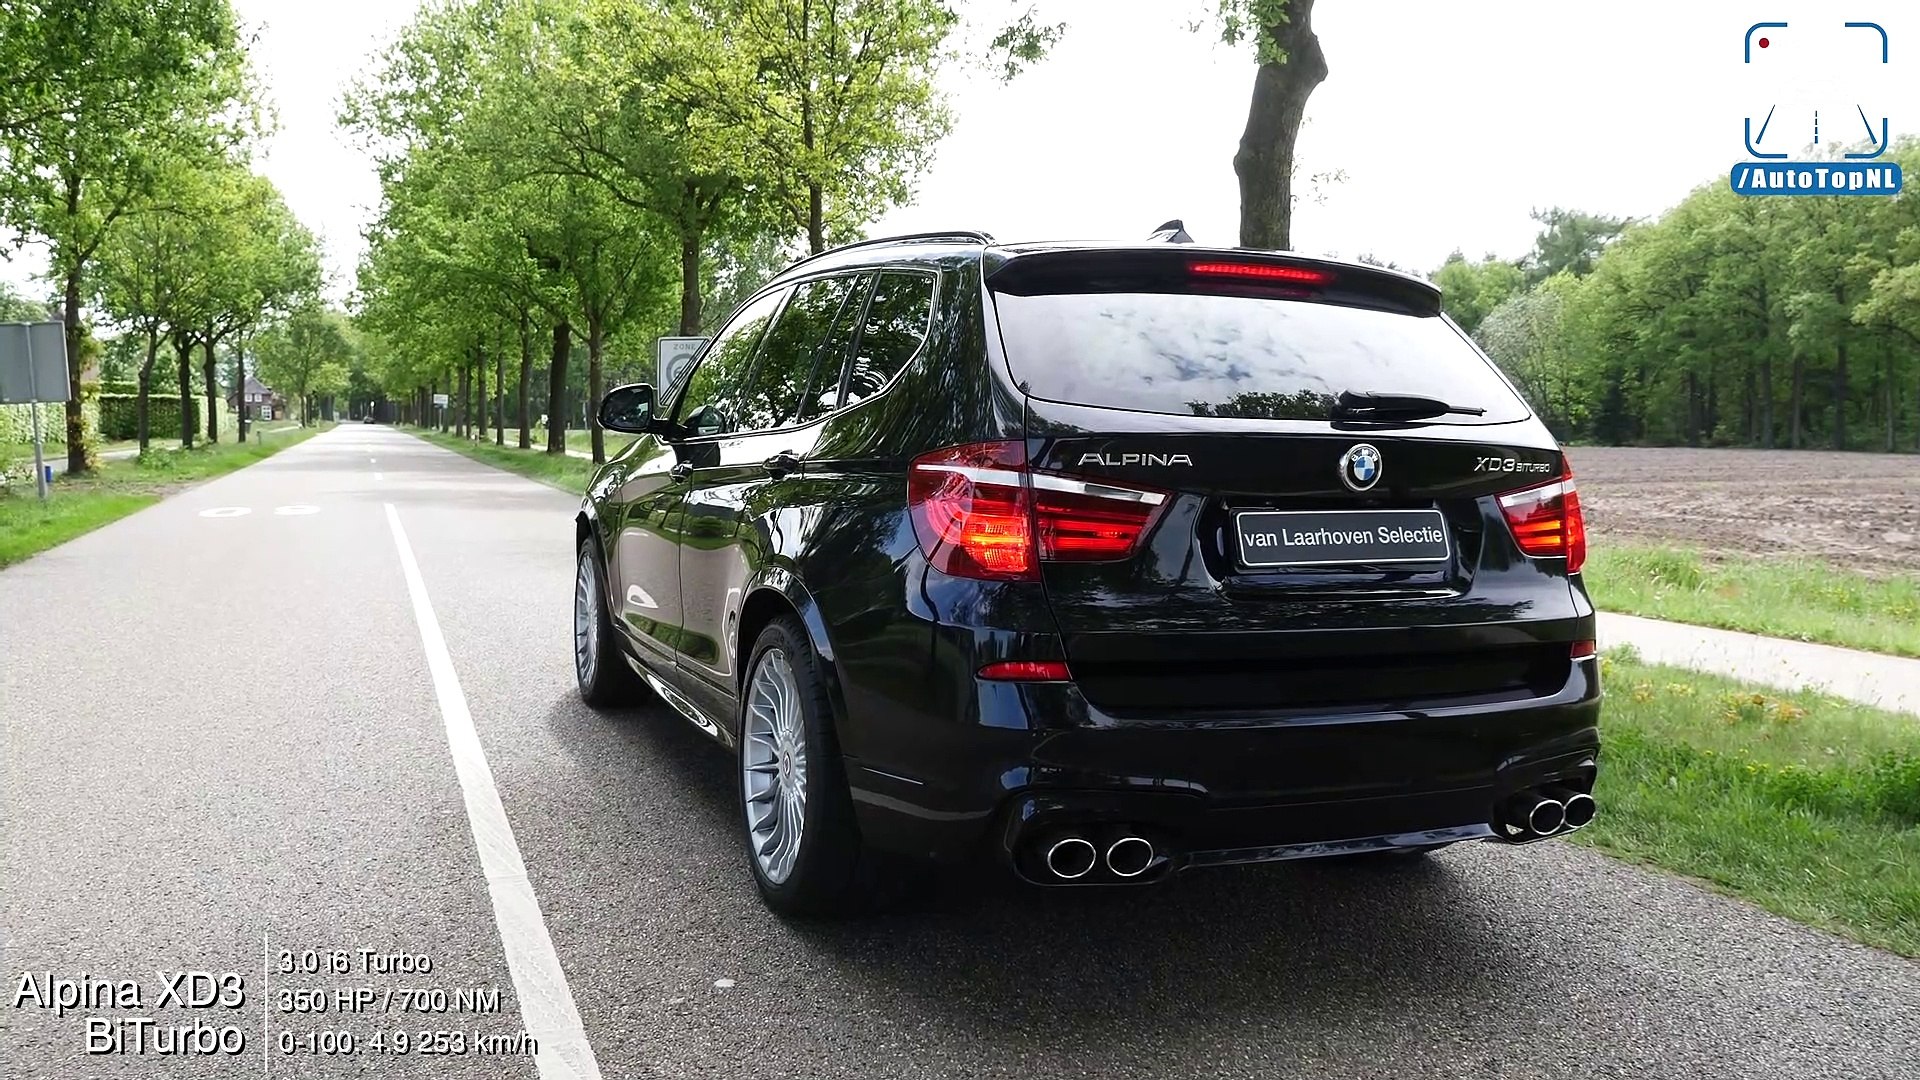 ALPINA XD3 BiTurbo ACCELERATION 0-205km/h LAUNCH CONTROL by AutoTopNL